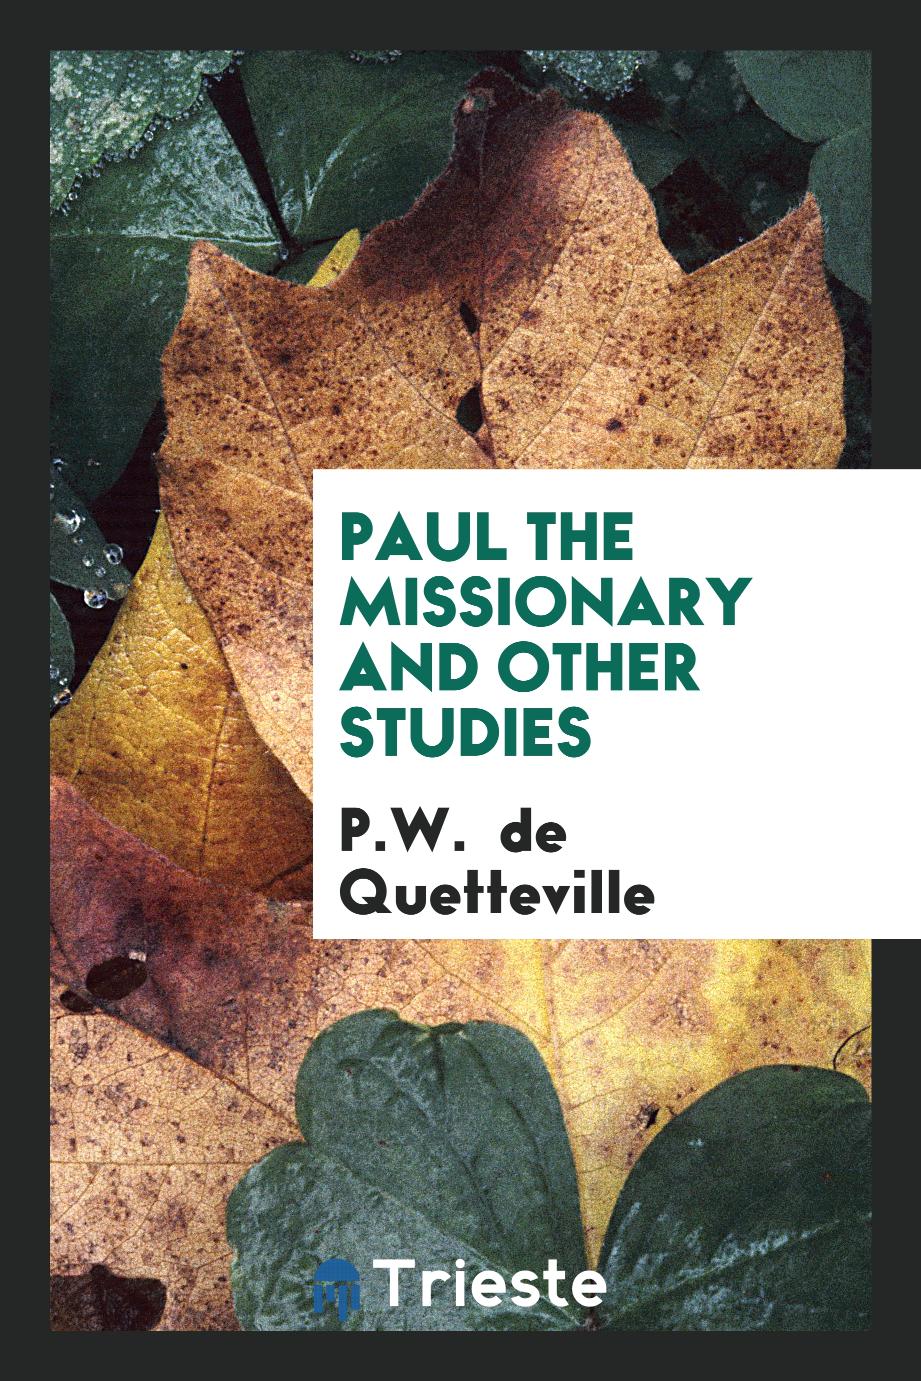 Paul the Missionary and other studies